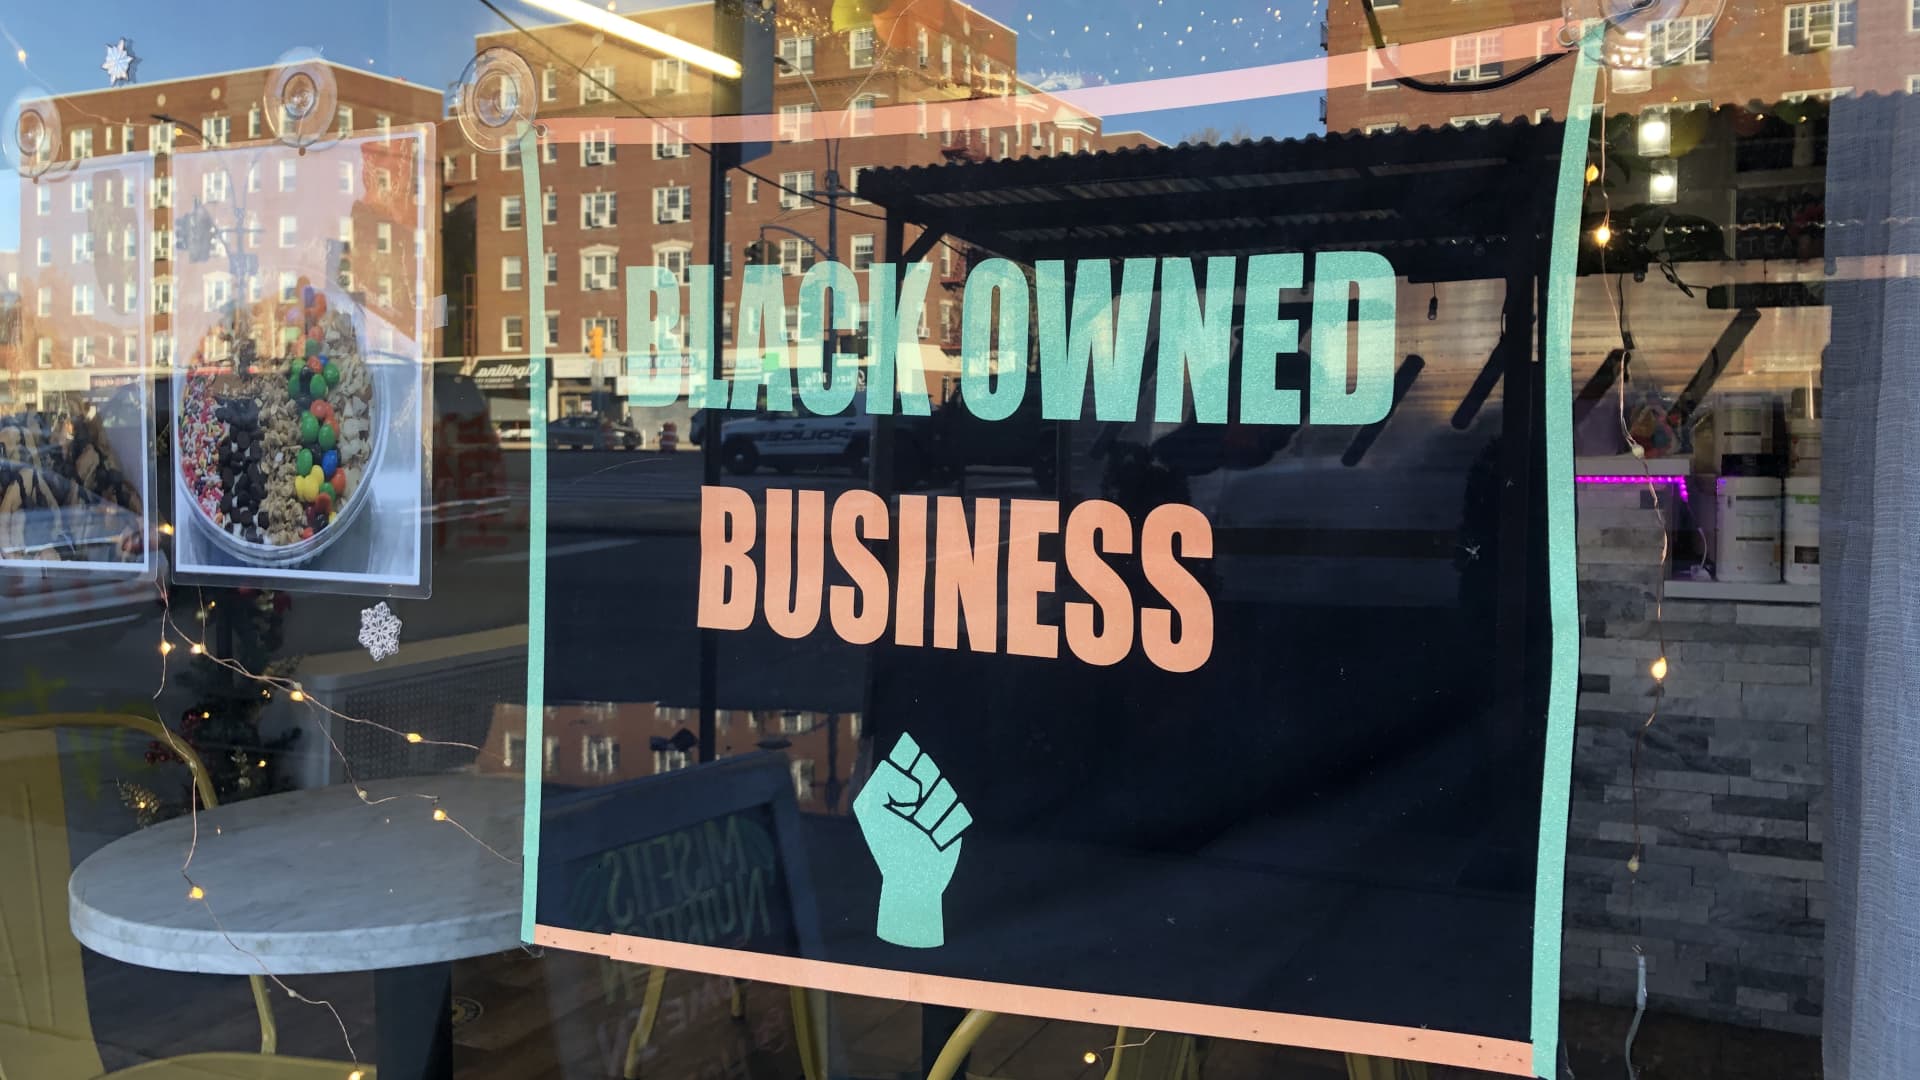 Black Owned Business sign in local storefront window, MisFits Nutrition, Queens, New York.